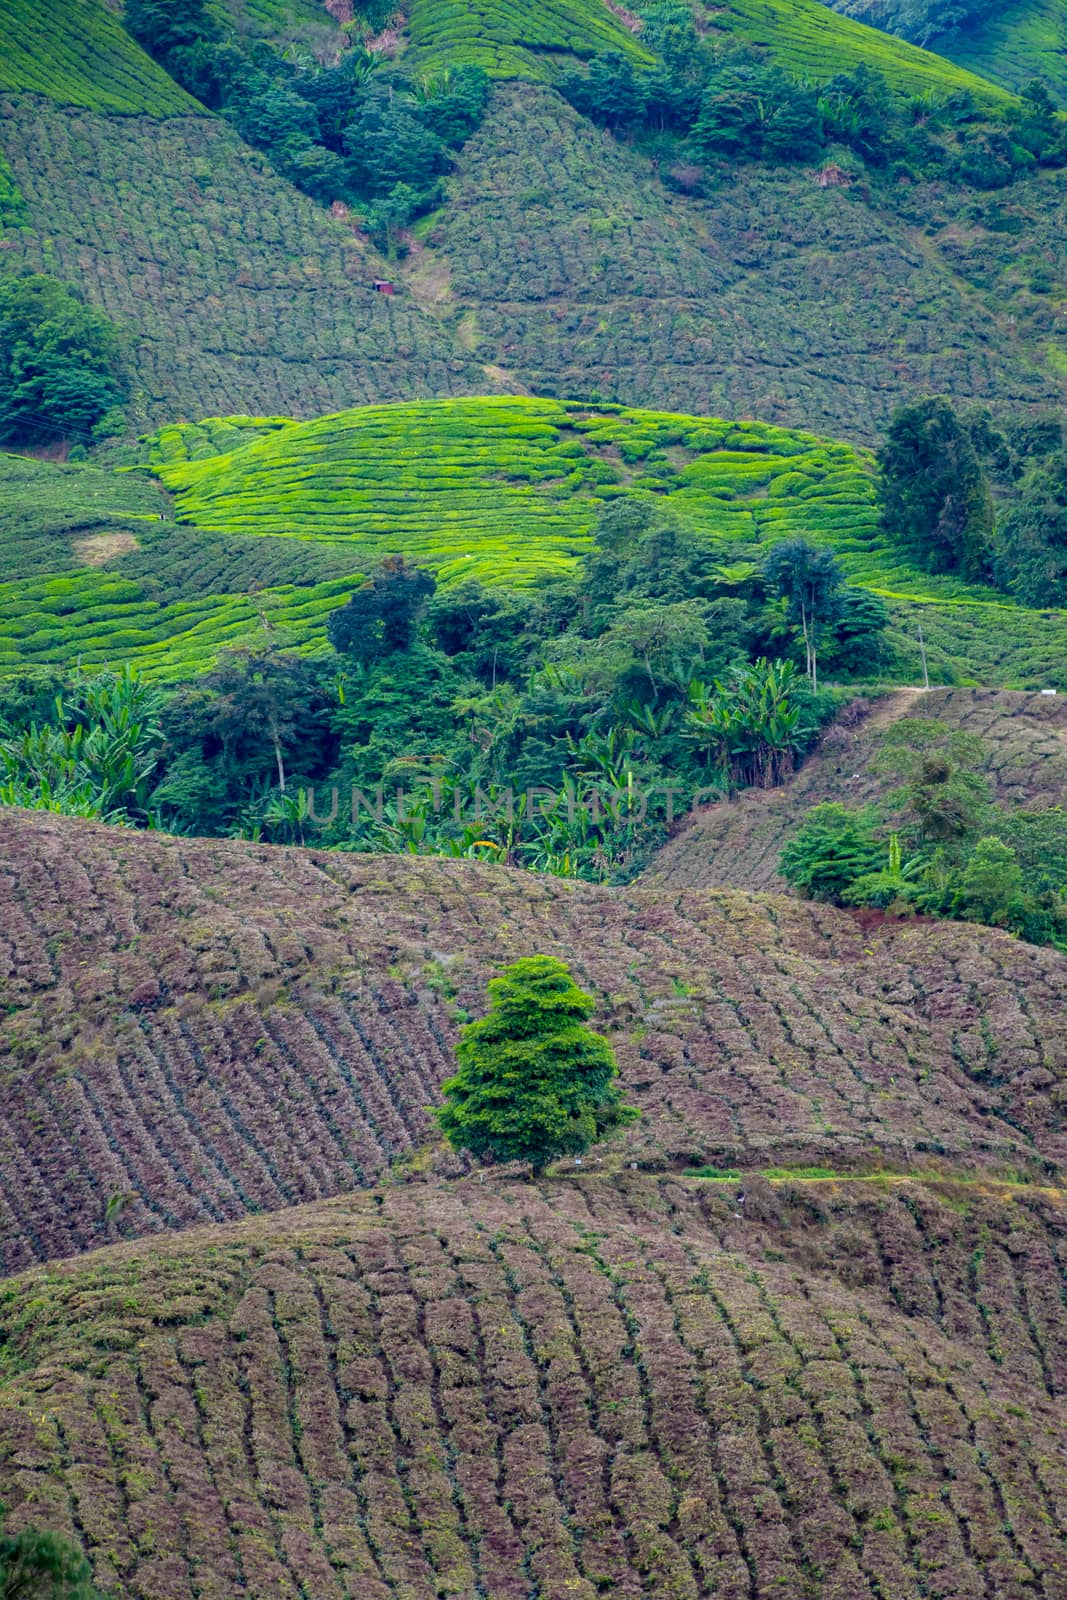 Tea plantation rows of Camellia sinensis reaching from valley bottom to the mountain top